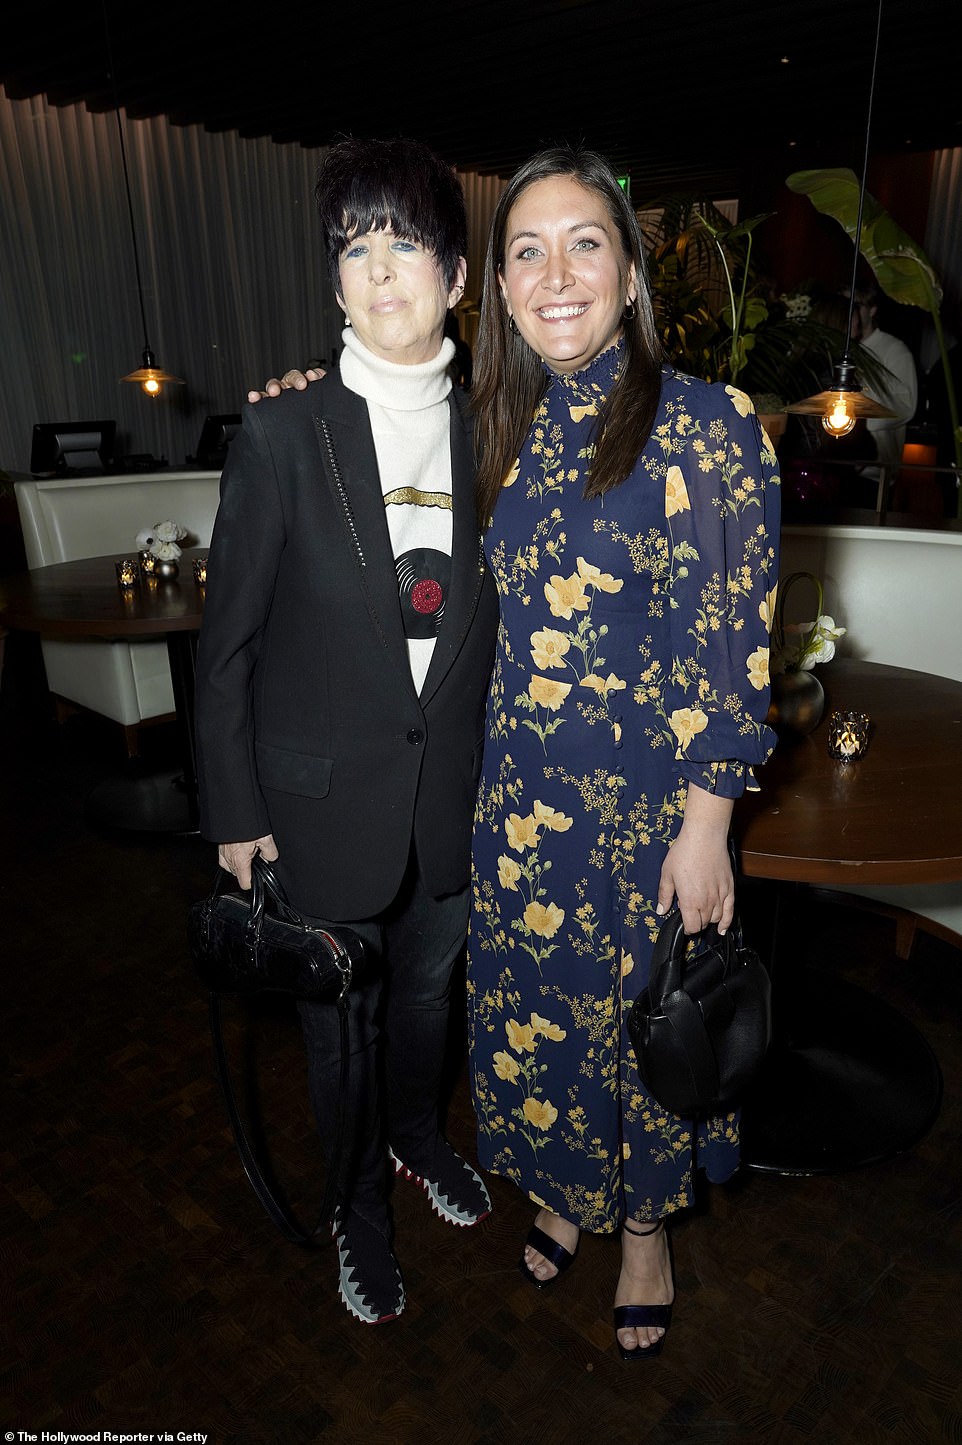 Acclaimed songwriter Dianne Warren showcased her unique style in a black suit with a white turtleneck alongside Karen Ryan in a blue and yellow floral dress.